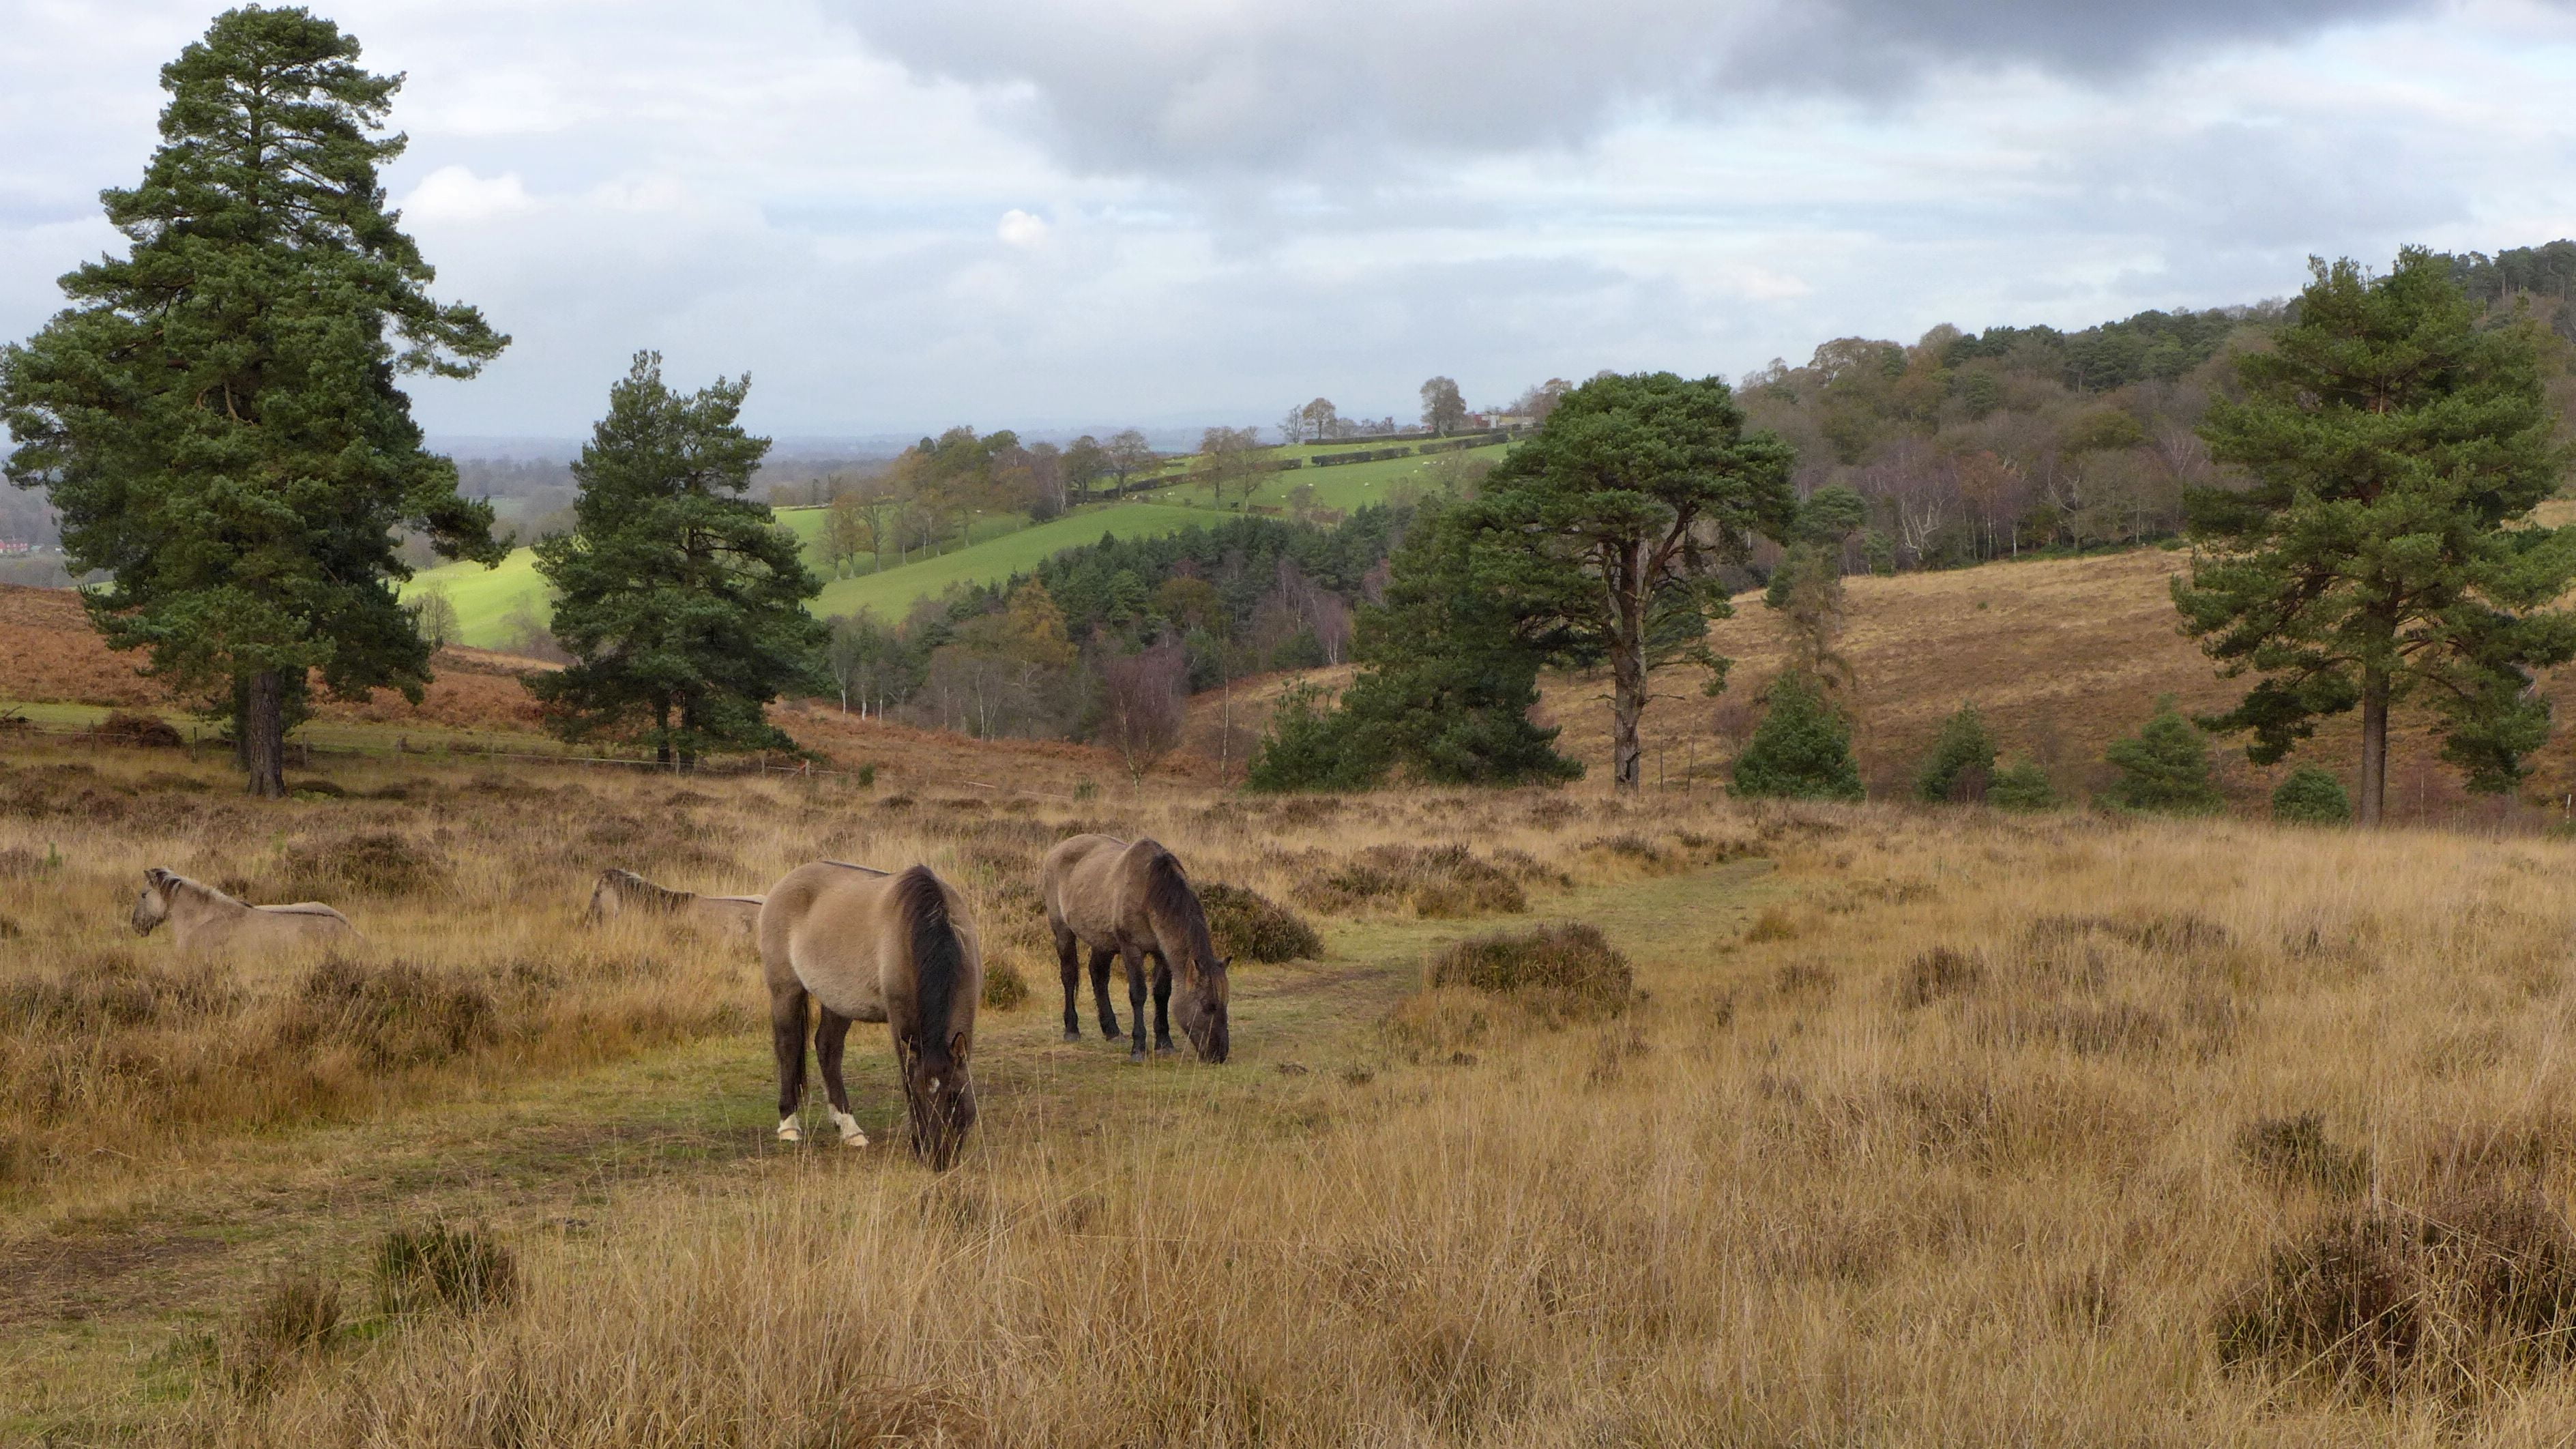 two horses on grass field near trees, forest view